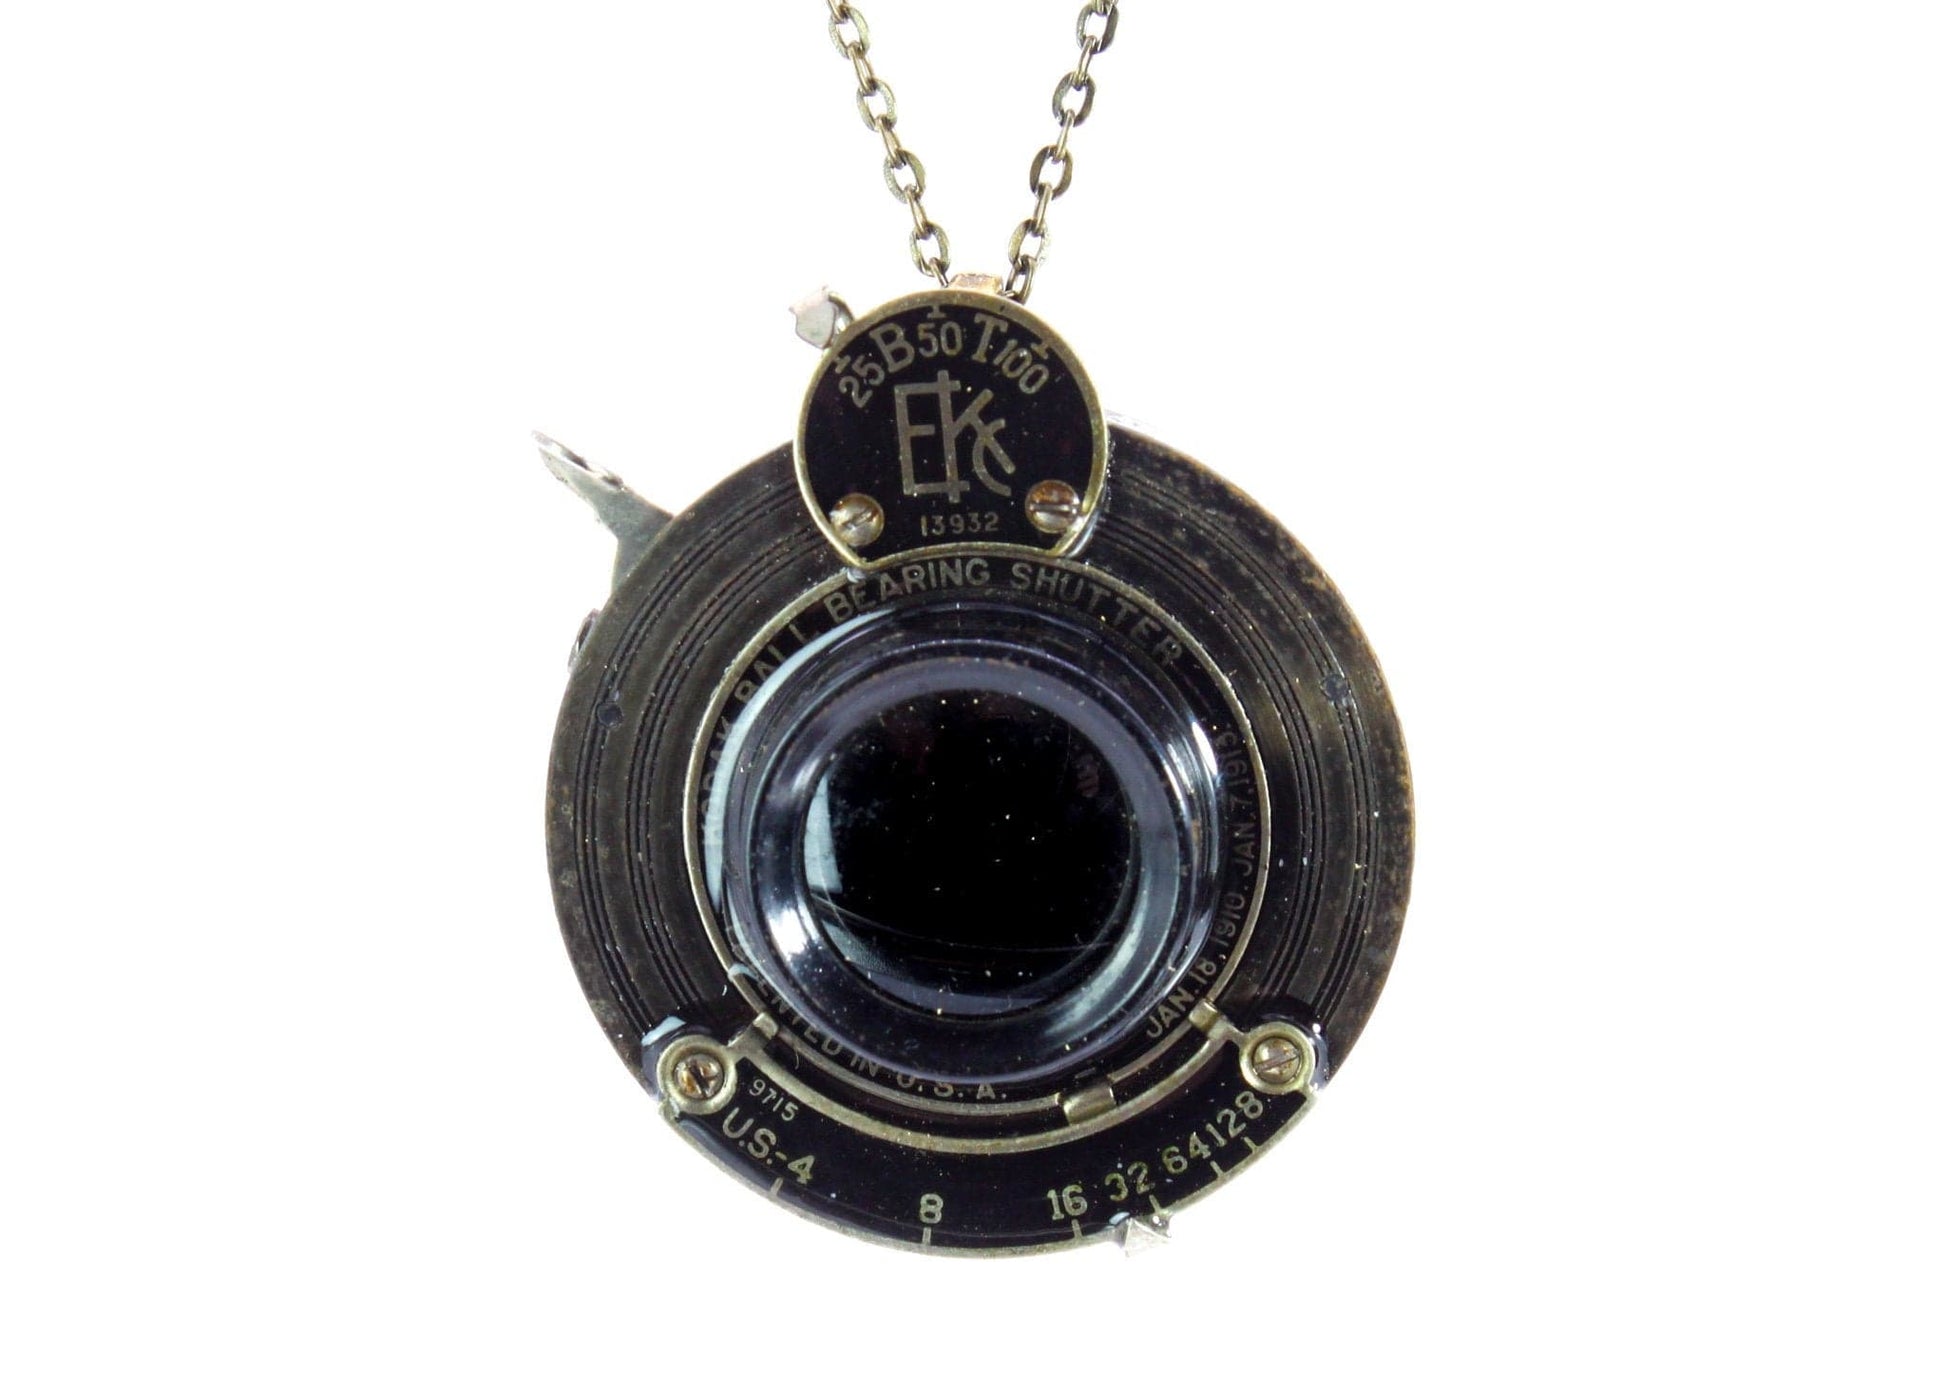 Vintage Medium Camera Lens Pendant Necklace, Gift for Wife, Eco-Friendly Upcycled Statement Jewelry for Her, Handmade Steampunk Jewelry Style 1